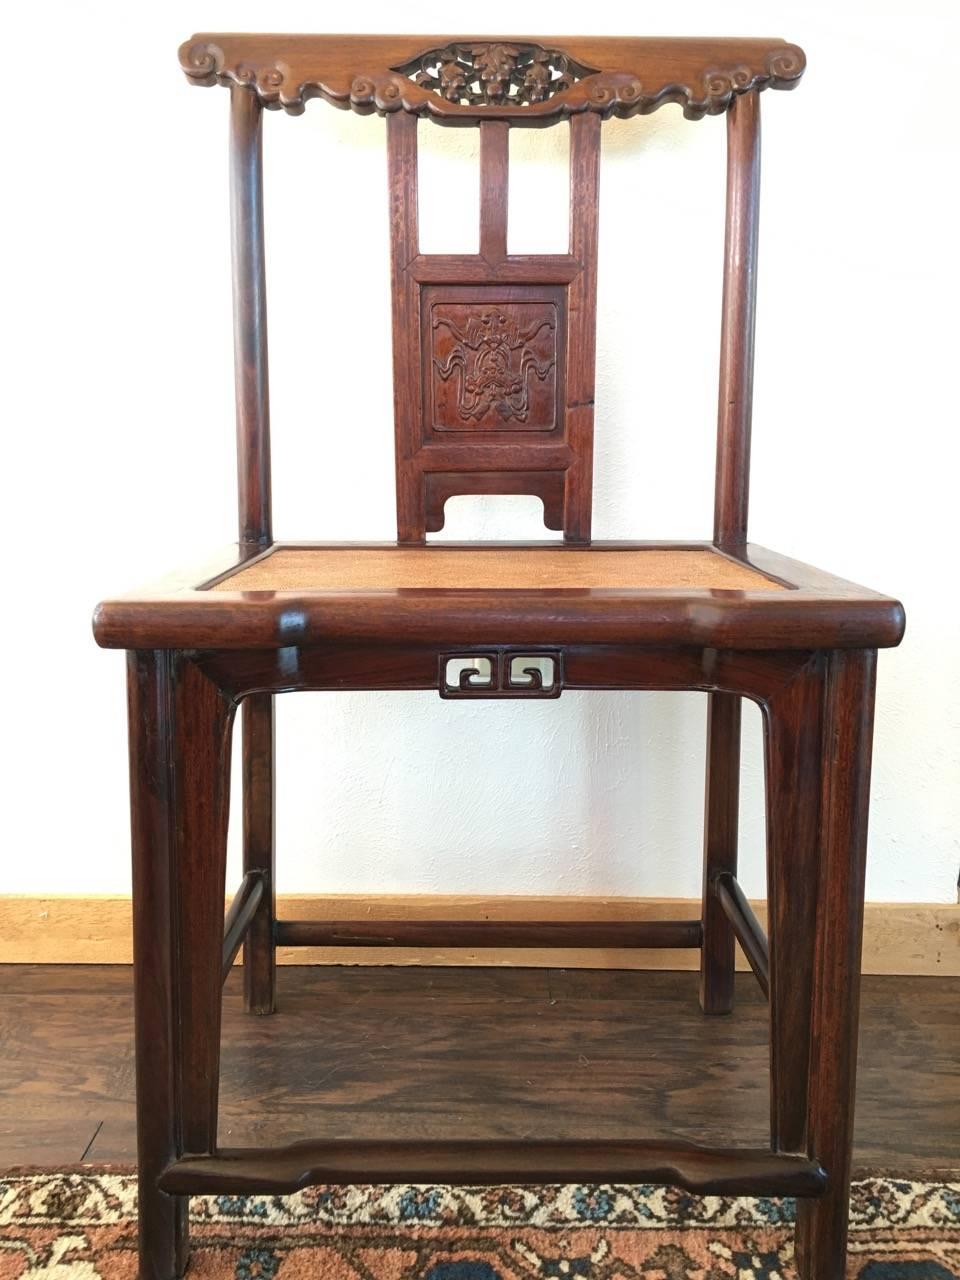 Beautiful pair of Chinese hardwood side chairs. Very light and beautiful grain, possible Huanghuali, 19th century.

AVANTIQUES is dedicated to providing an exclusive curated collection of Fine Arts, Paintings, Bronzes, Asian treasures, Art Glass and